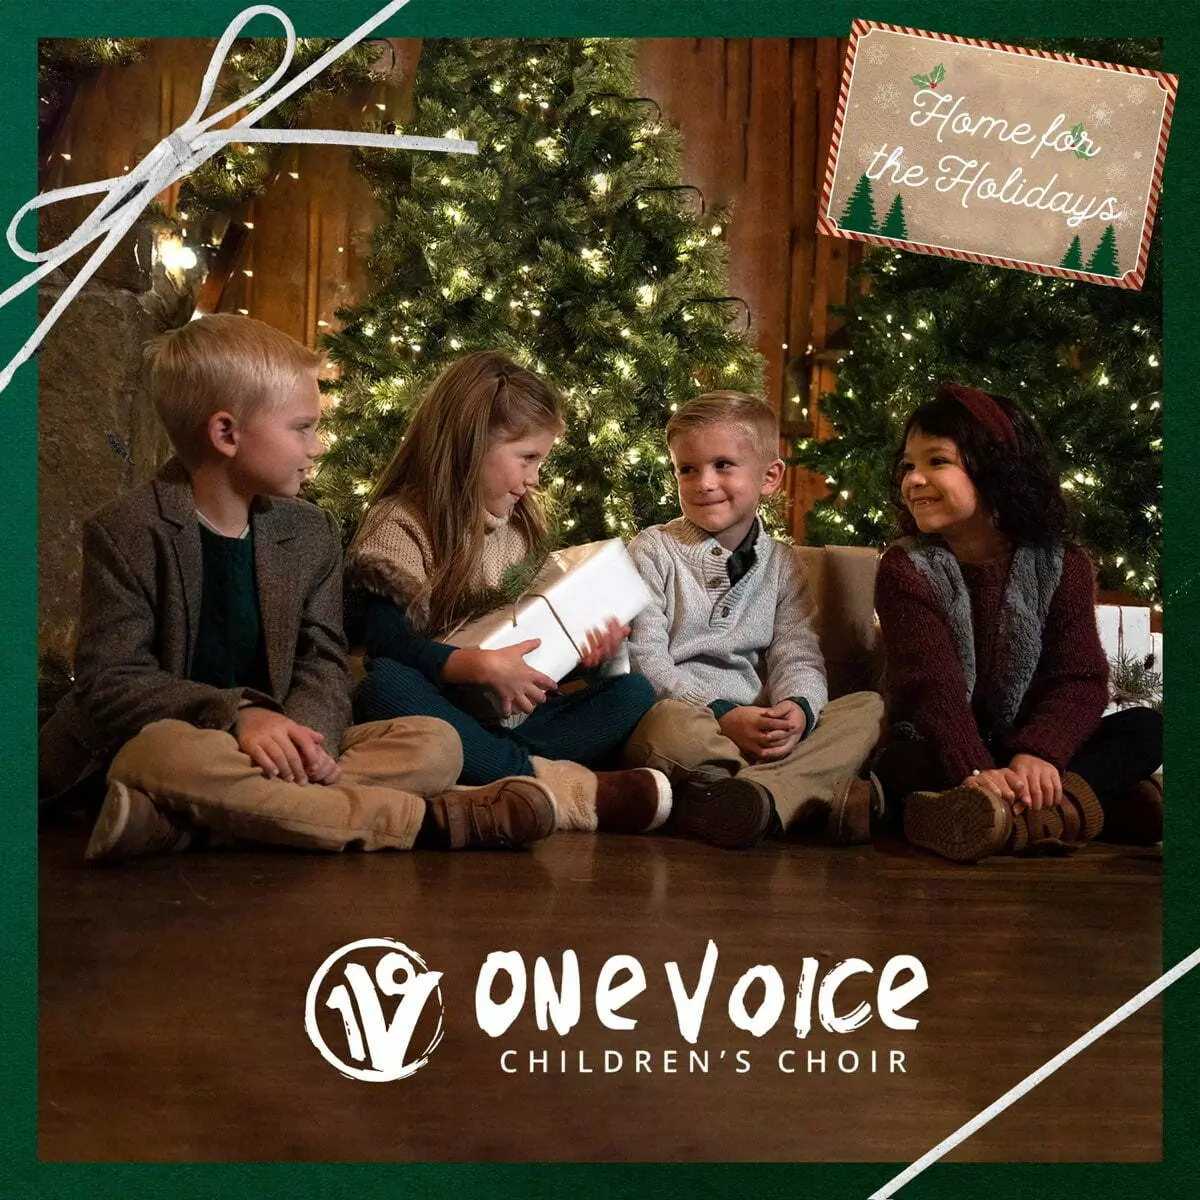 Home For the Holidays by One Voice Children's Choir on Apple Music